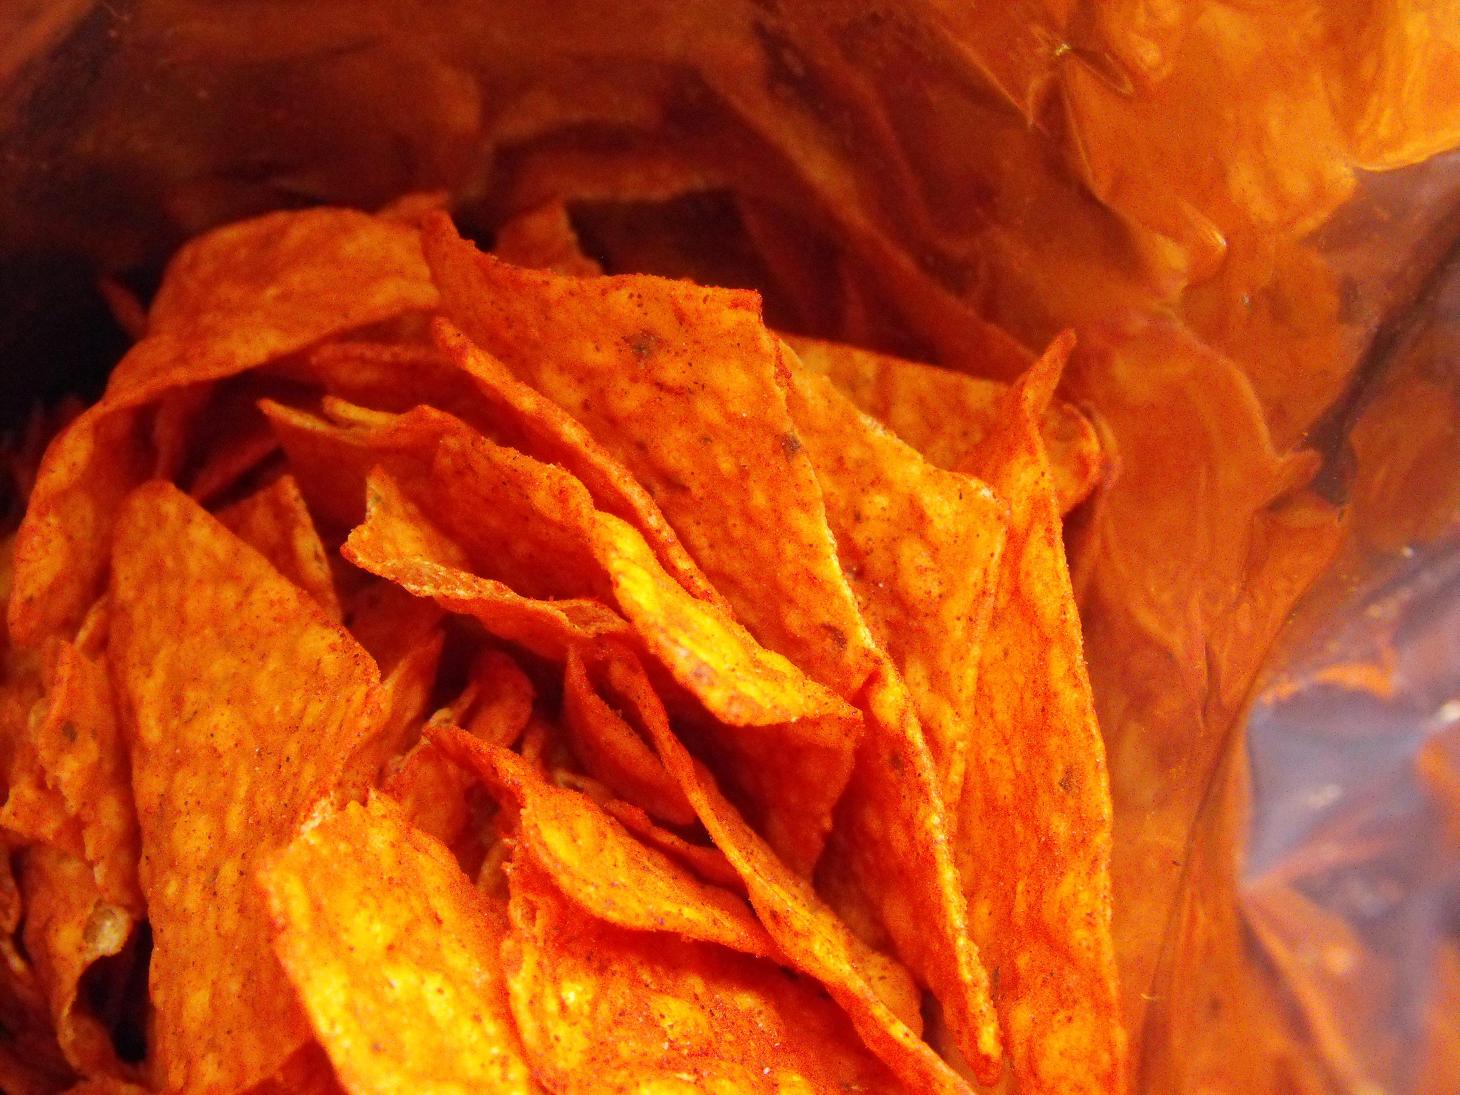 The Man Credited With Inventing Doritos Had Chips